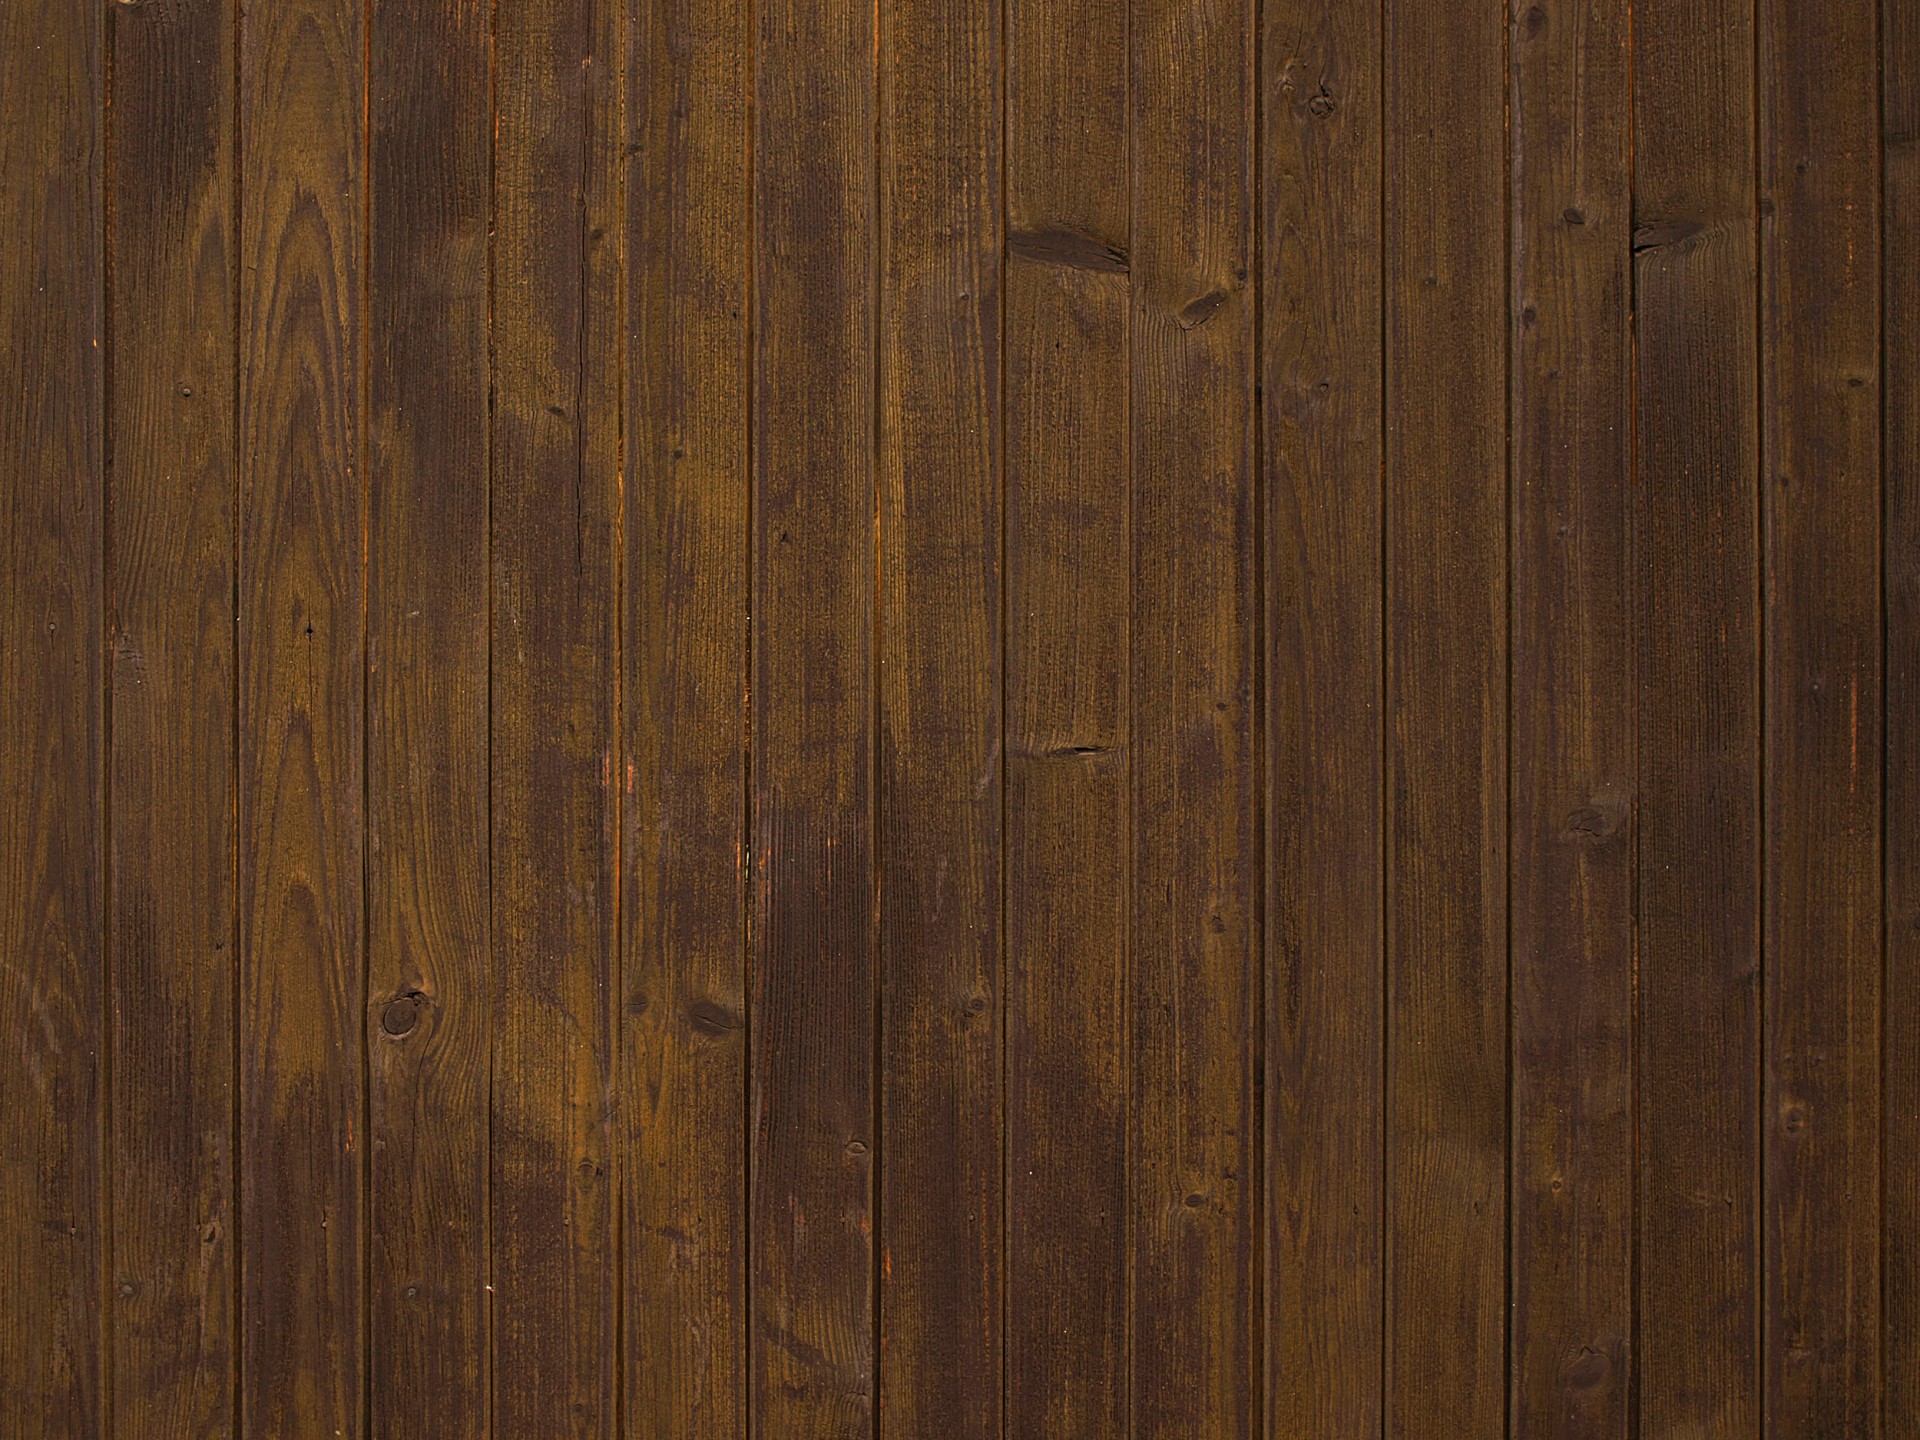 wood wooden texture free photo